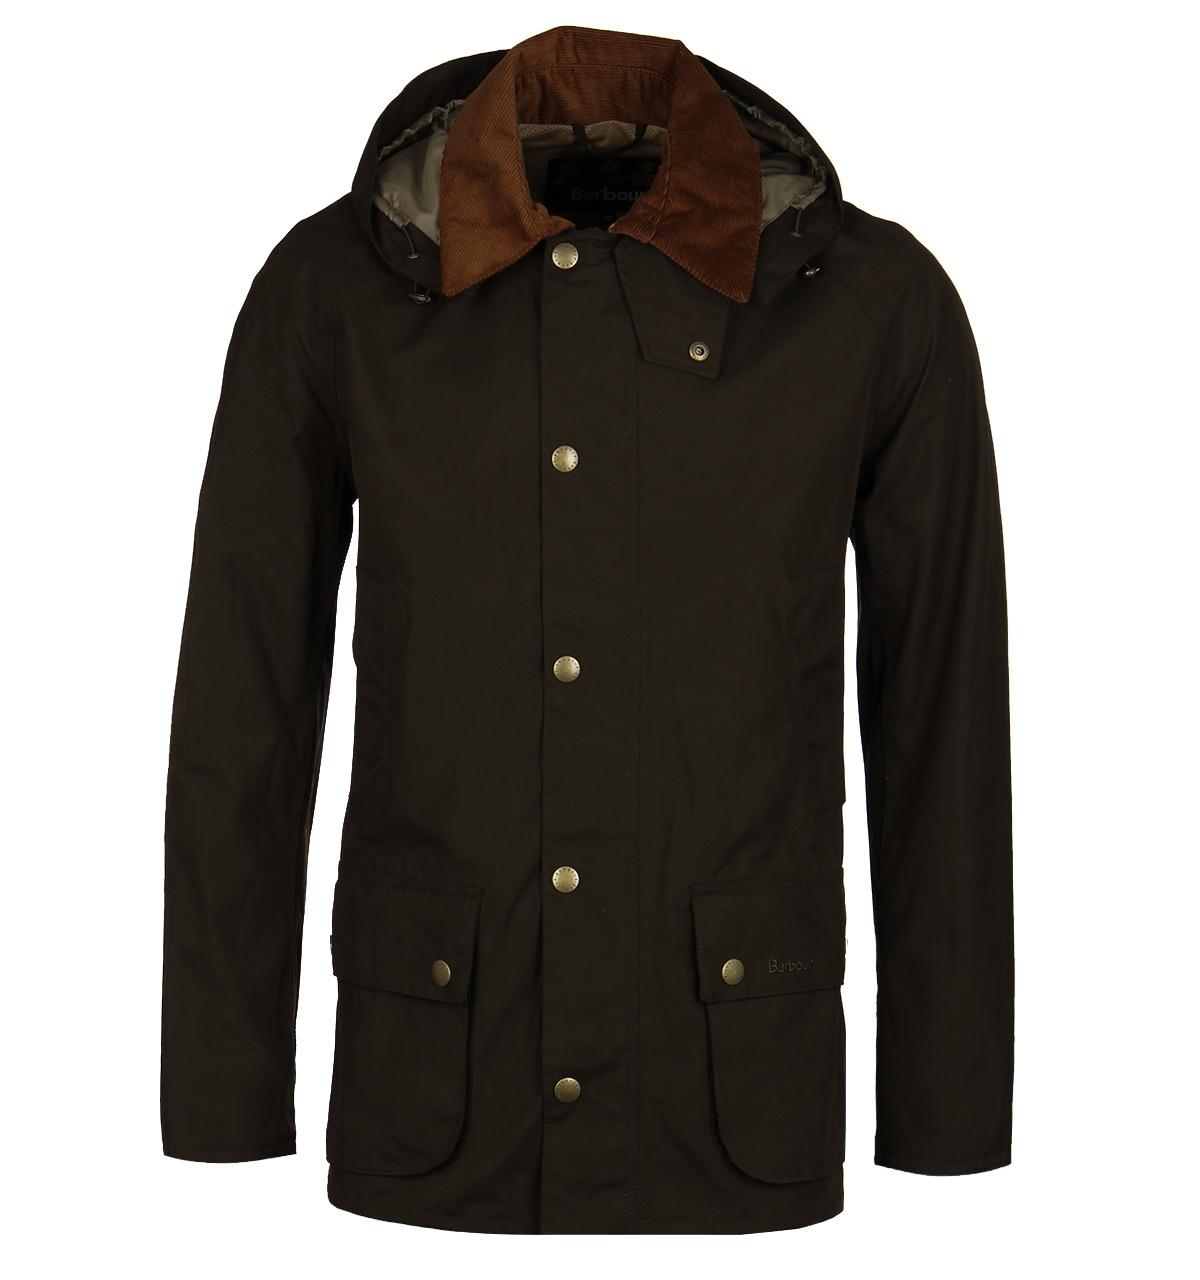 Barbour Cotton Olive Ashby Midas Waterproof Jacket in Green for Men - Lyst